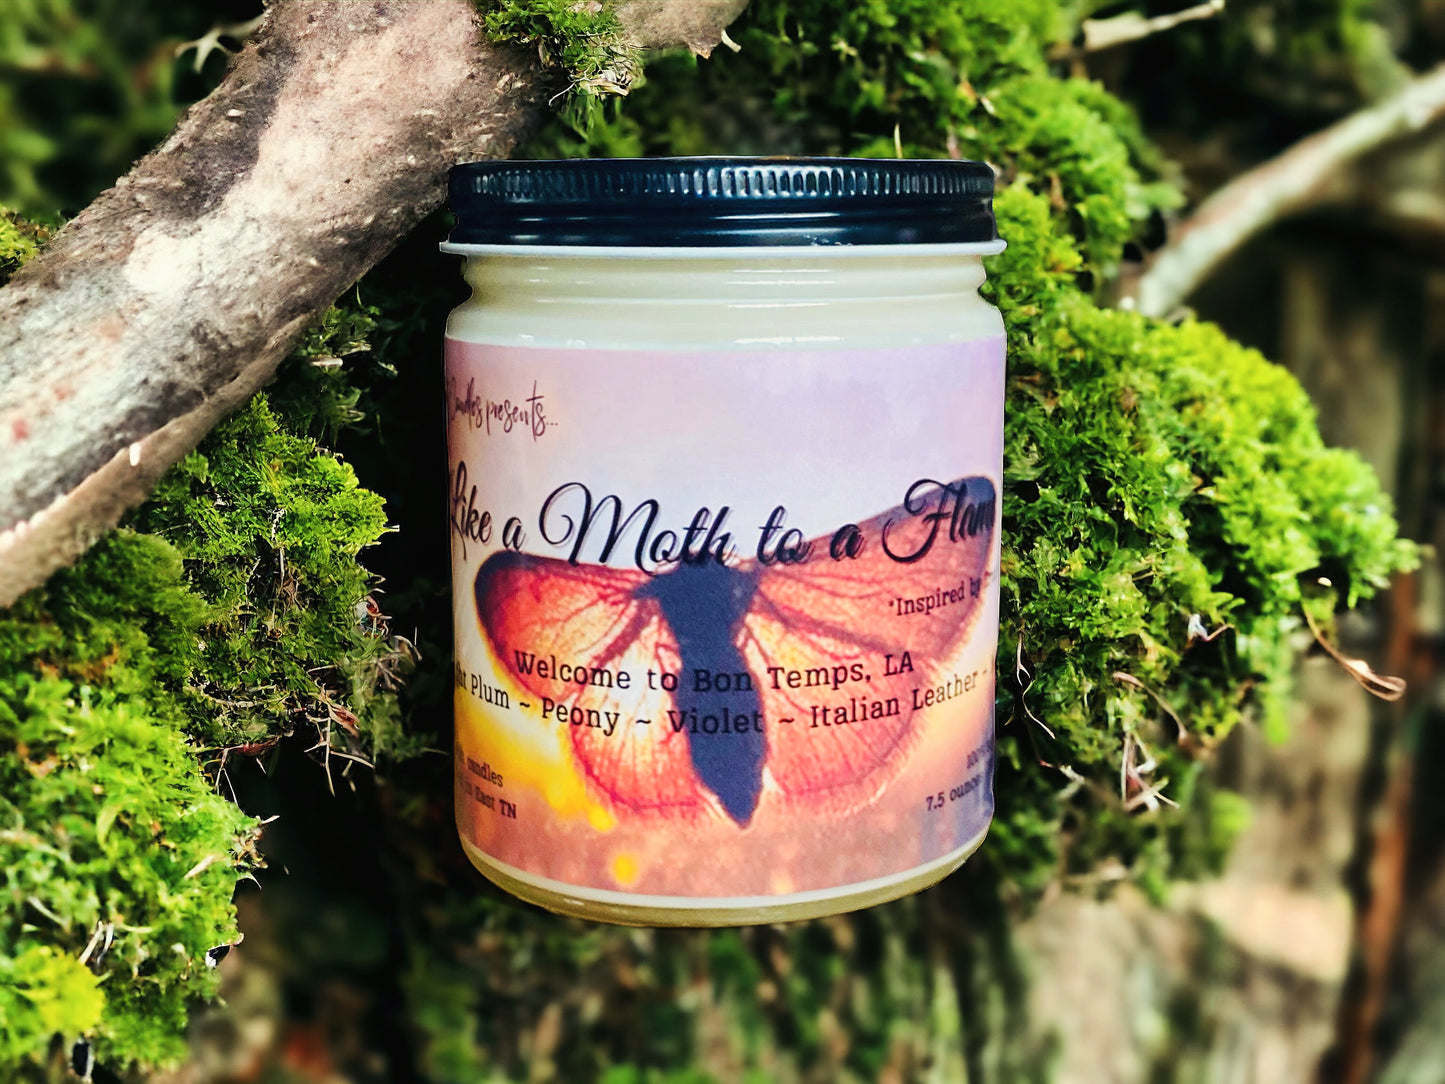 Like a Moth to a Flame - Inspired by True Blood - Candle